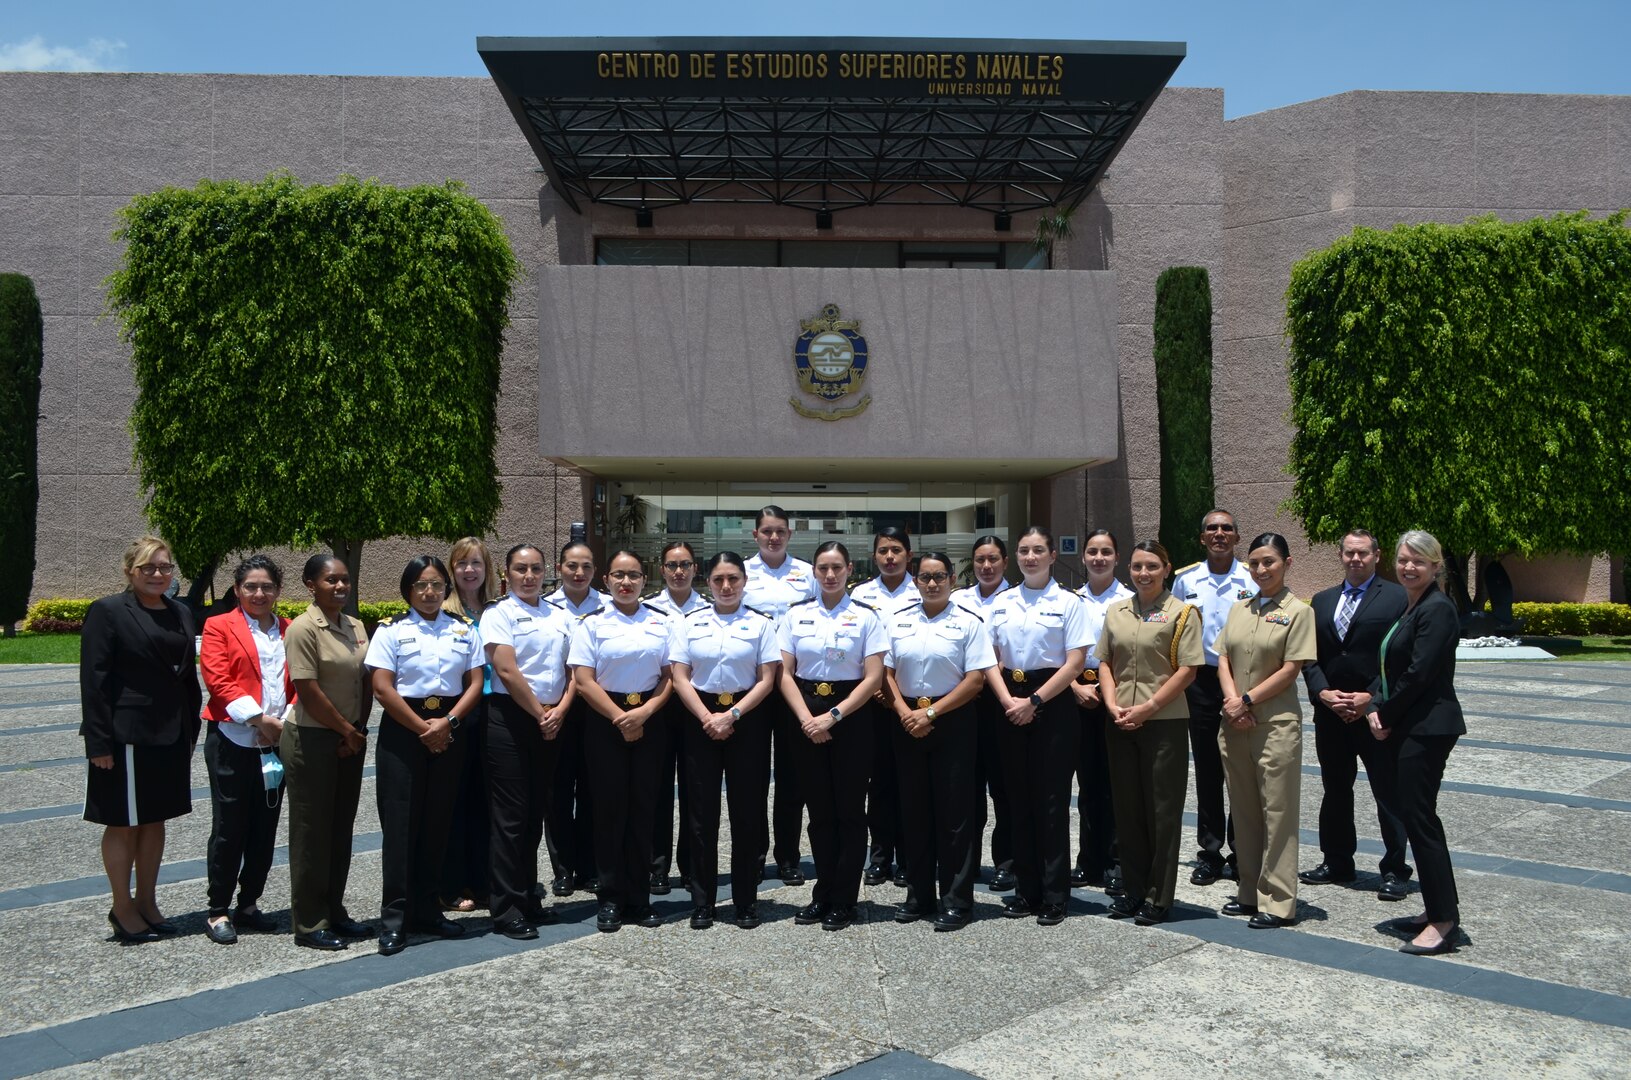 Gender advisors from U.S. Northern Command, U.S. Army North and the U.S. Office of Defense Coordination in Mexico City joined a team from the U.S. Defense Institute of International Legal Studies (DIILS) to deliver Women, Peace, and Security focused training to lawyers and emerging leaders in the Mexican Army and Air Force (SEDENA) and Mexican Navy and Marines (SEMAR) Aug. 1 – 13 in Mexico City.